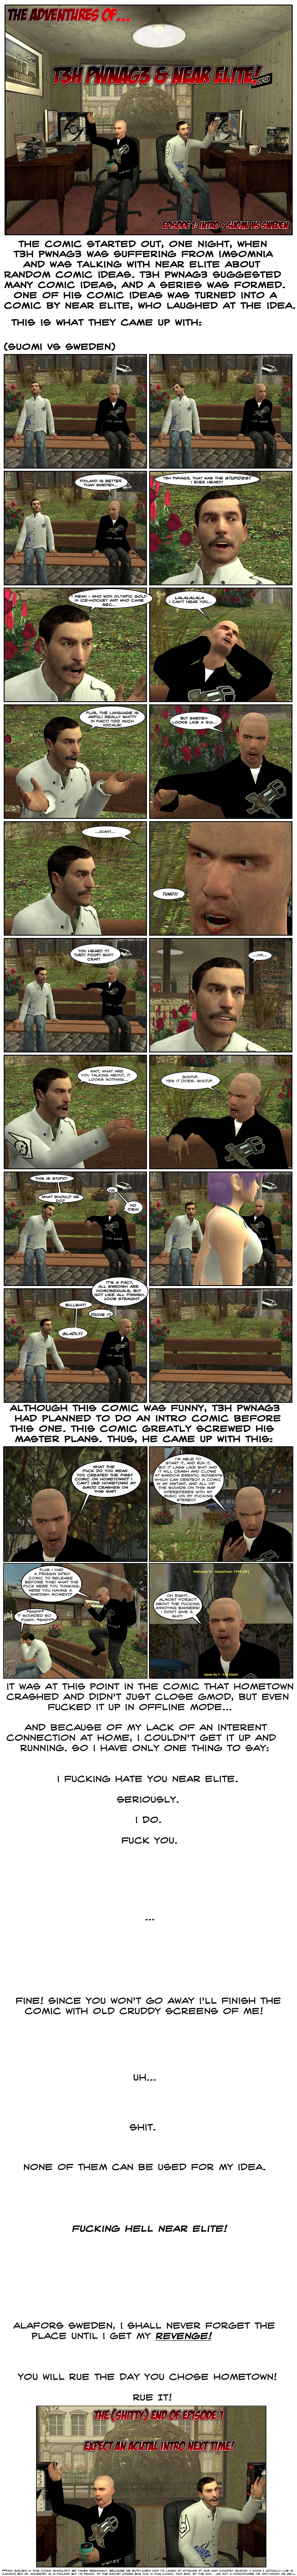 A message explains the comic started out one night when T3h Pwnag3 was suffering from insomnia and was talking with Near Elite about random comic ideas. T3h Pwnag3 suggested many comics ideas and a series was formed. One of his comic ideas was turned into a comic by Near Elite, who laughed at the idea. This is what they came up with. We then see Near Elite and T3h Pwnag3 sitting in a bench in the Garry’s Mod map HomeTown 1999. As they sit and stare around, Pwnag3 suddenly tells Near Finland is better than Sweden. Near retorts that was the stupidest thing he ever heard, counter-arguing about who won Olympic gold in ice hockey and who came second, but Pwnag3 covers his ears and starts singing lalalalala in order to not hear Near. Near adds that the language is awful, really shitty in fact, too many vowels. Pwnag3 tells him that Sweden looks like a big giant turd, then adds poop, shit, crap. Near stares at him silently for a moment, then asks wait, what is he talking about, it looks nothing like it. Pwnag3 cuts him off and says shut up, yes it does, shut up. Near protests this is stupid, Pwnag3 agrees, Near asks what should they do and Pwnag3 tells him no idea. Suddenly, an attractive, voluptuous young woman walks past the two. As they stare at her go, Pwnag3 states it’s a fact all Swedish are homosexuals, not like all Finnish who are 100% straight. Near calls bullshit. Pwnag3 dares him to prove it, Near retorts gladly. They chase after the girl. Another message says that, although this comic was funny, T3h Pwnag3 had planned to do an intro comic before this one and this comic greatly screwed up his master plans, so he came up with this. Pwnag3 reappears in Hometown and angrily asks Near what the fuck does he mean he created the first comic on Hometown. He shouts he can’t use HomeTown, his Garry’s Mod crashes on this map. He explains that he’s able to start it and run it, but it lags like shit and will crash and close at random erratic moments, which can destroy a comic in an instant, and all of the sounds on the map interfere with his music on his fucking stereo. Pwnag3 raises his hands as he stands over the bench and complains that he had a frigging intro comic to release before this and what the fuck was Near thinking, was he having a Swedish moment. Sitting, Near cries and says it sounded so funny. Pwnag3 then remembers about the fucking annoying banners that say Welcome to HomeTown 1999 and Made by F. Kalkman. Pwnag3 states he doesn’t give a shit. A final message notes that it was at this point in the comic that HomeTown crashed and didn’t just close GMod, but even fucked it up in offline mode, and because of Pwnag3’s lack of an Internet connection at home, Pwnag3 couldn’t get it up and running, so he has only one thing to say: he fucking hates Near Elite, seriously, he does, fuck you. A moment passes, then the message says fine, since you won’t go away, he’ll finish the comic with old cruddy screens of him. He looks for some, then says shit, none of them can be used for his idea. Pwnag3’s message says fucking hell, Near Elite, then Pwnag3 promises he shall never forget Alafors, Sweden until he gets his revenge and Near will rue the day he chose HomeTown, rue it. In small letters, a disclaimer says that any racism in the comic shouldn’t be taken seriously because they both knew how to laugh at attacks at our own country, Pwnag3 noting he knows he actually lives in Canada but his ancestry is Finnish and he’s proud. If the racist jokes bug you in this comic, too bad, then Pwnag3 points out he is not a homophobe or anti-homo either. The end.